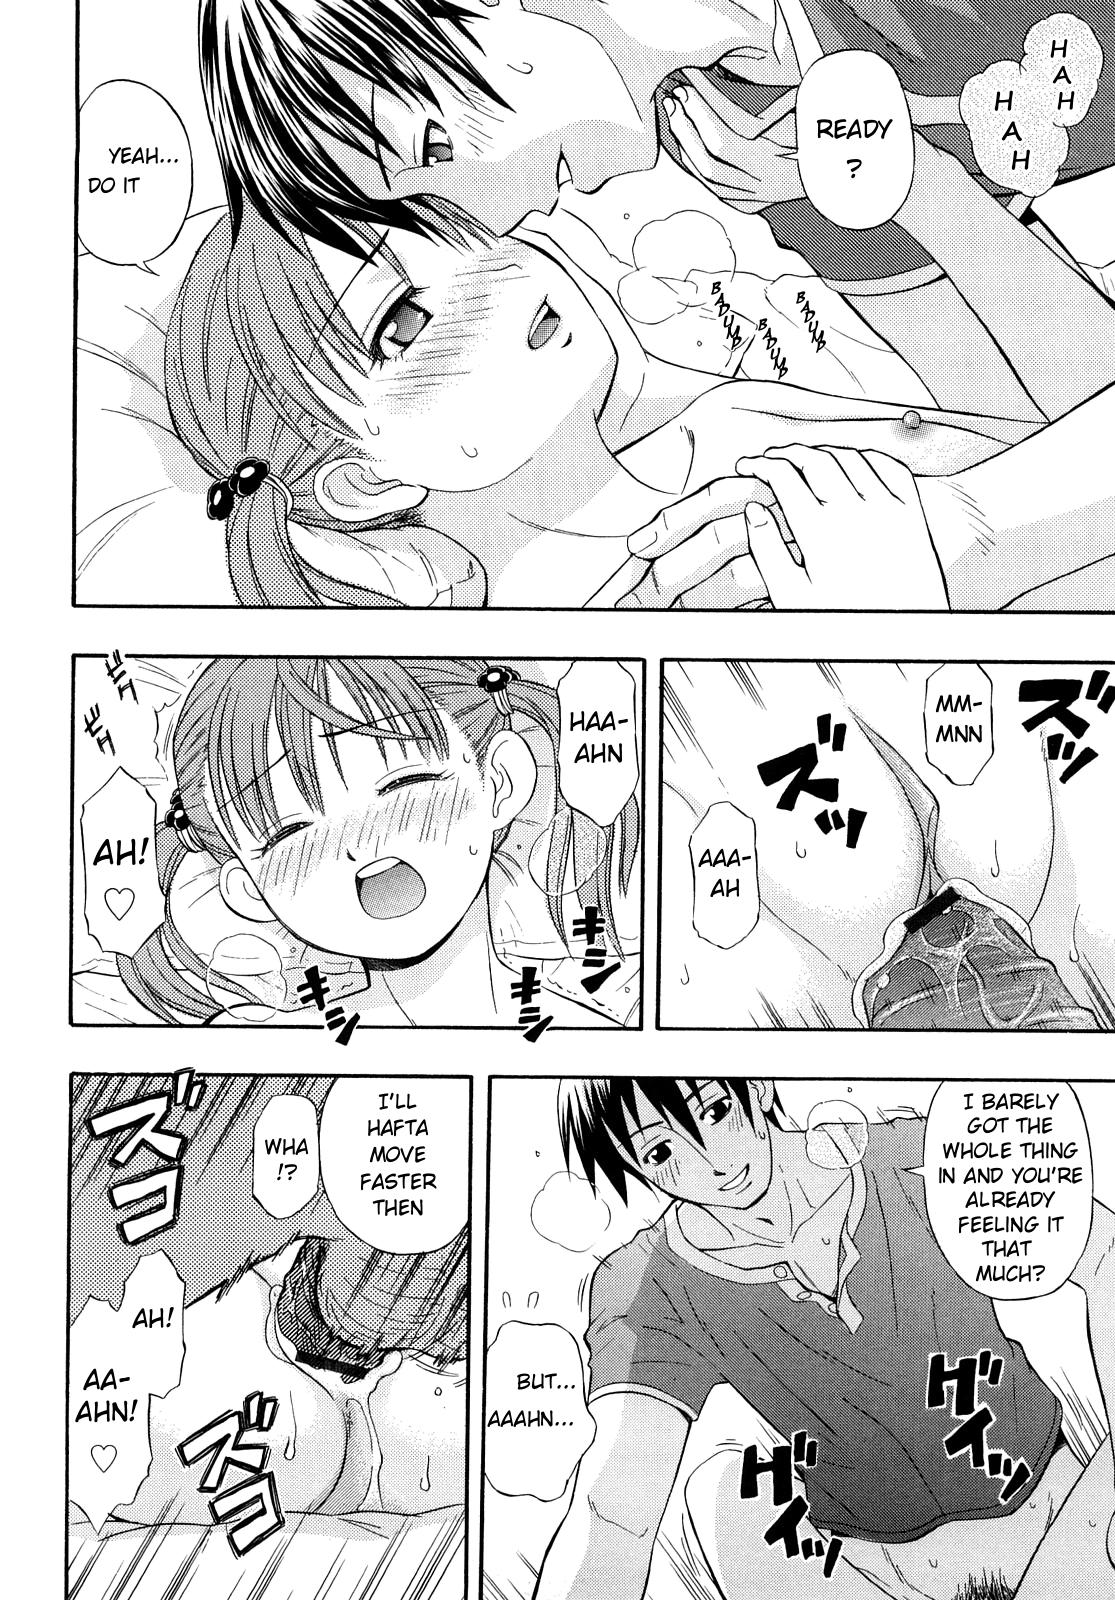 Yanks Featured Mizuho and Oniichan Ch. 1+2 Atm - Page 10